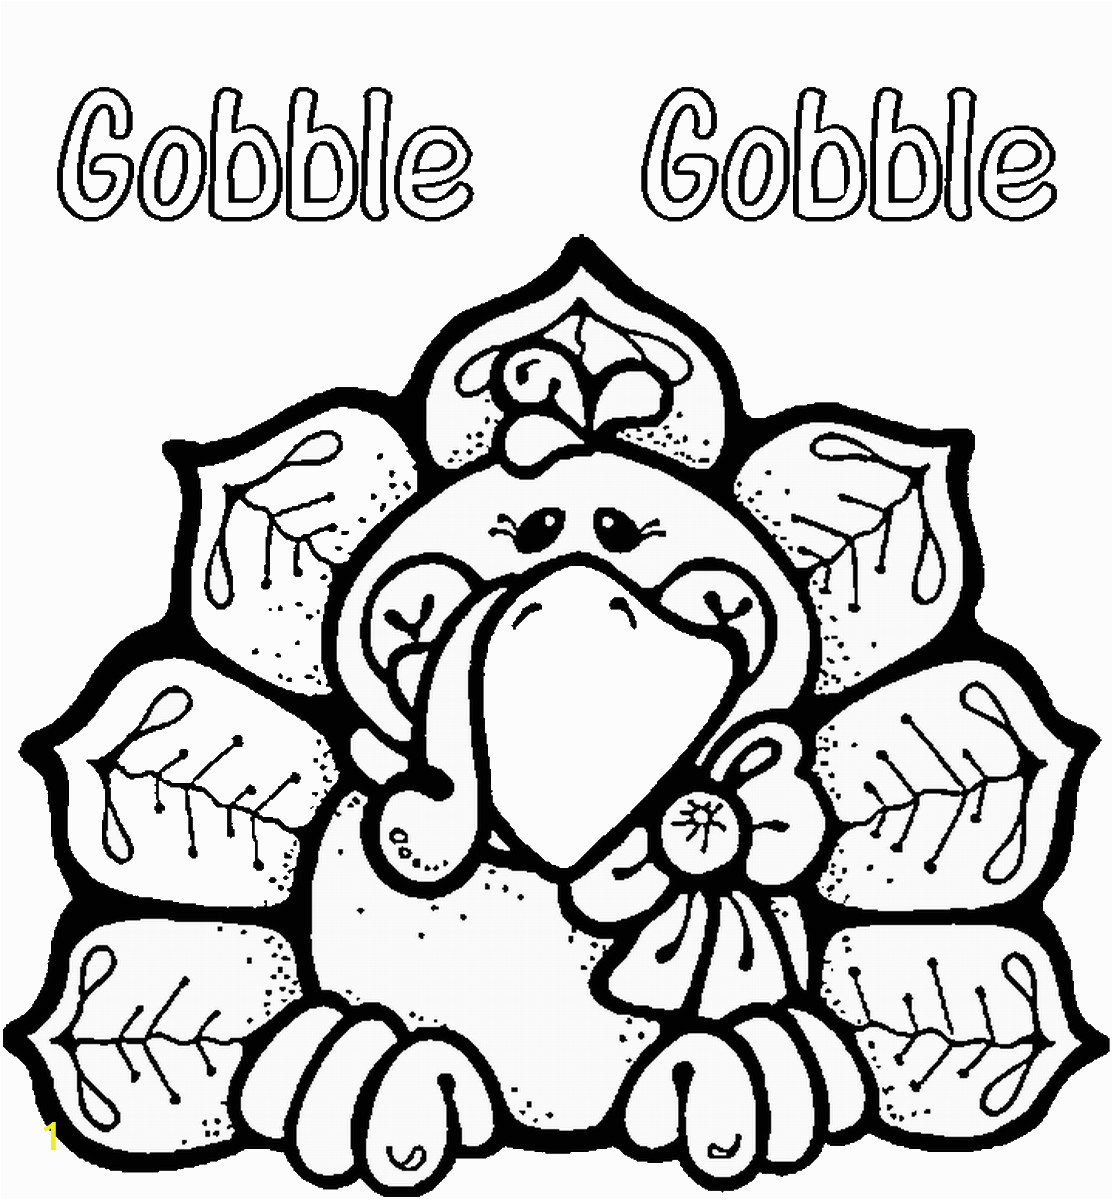 thanksgiving coloring pages for adults with numbers at drawings boston market message food sides happy whens turkey day funny peanuts traditional menu